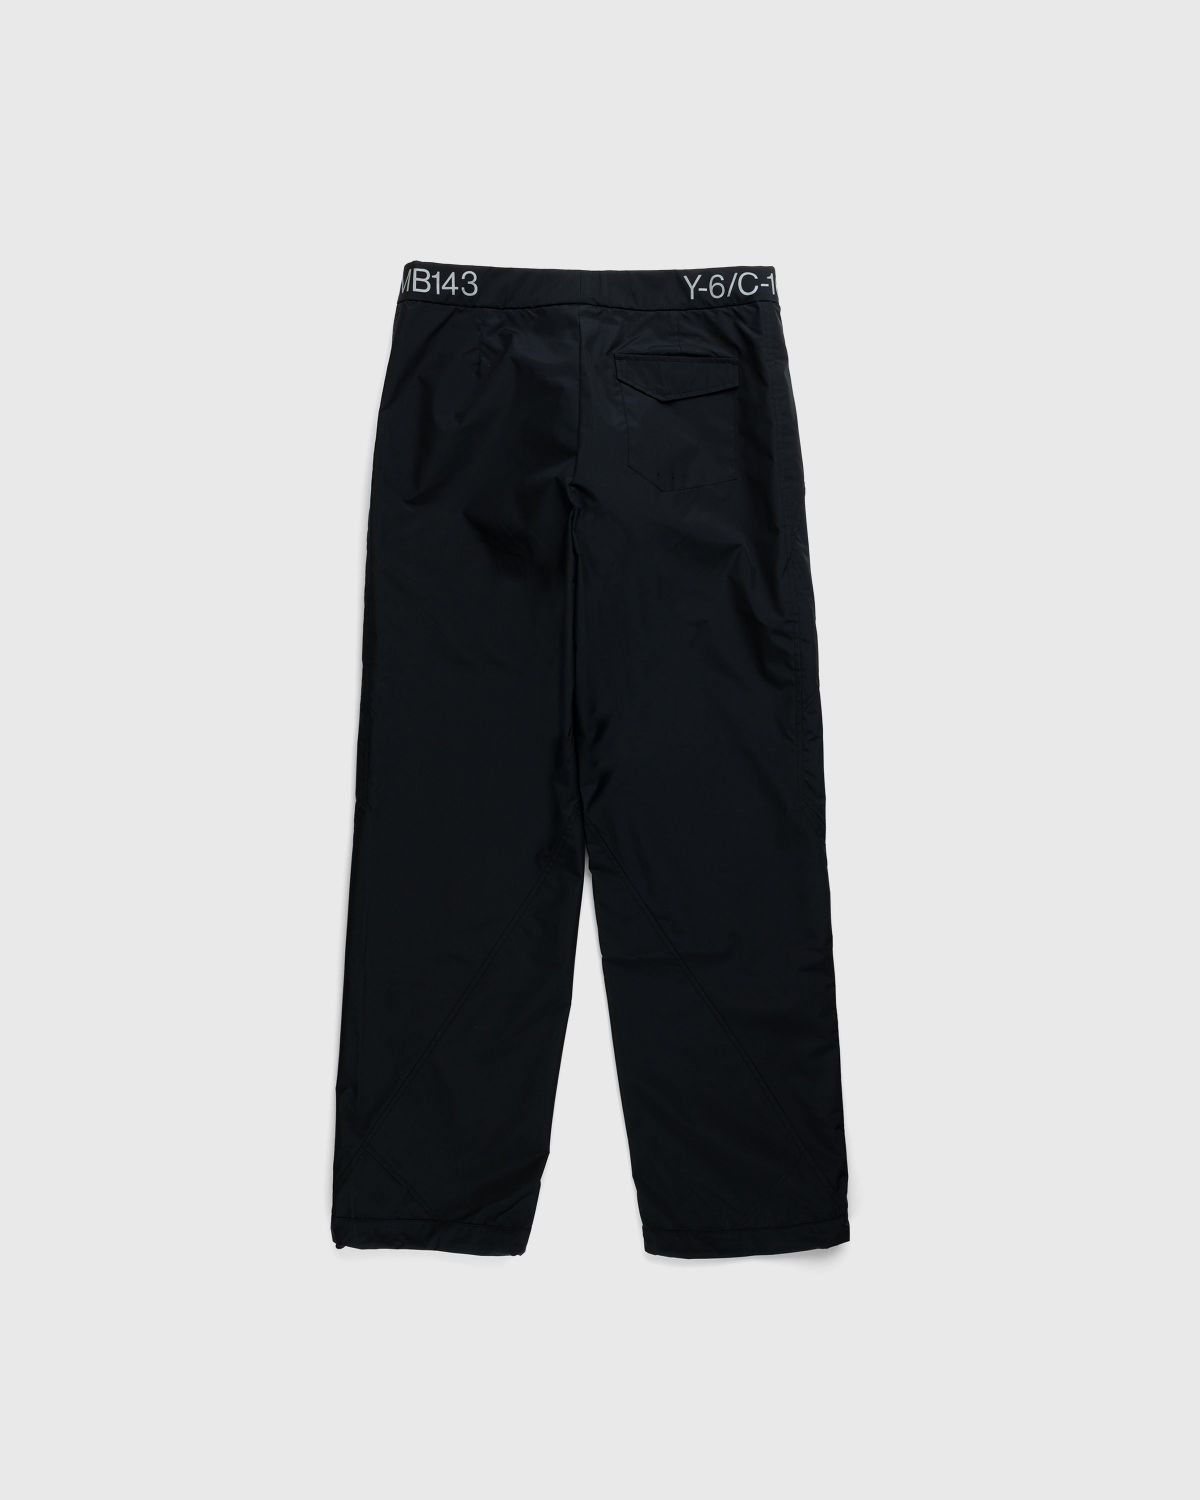 A-Cold-Wall* – Nephin Storm Pants Black - Active Pants - Black - Image 2